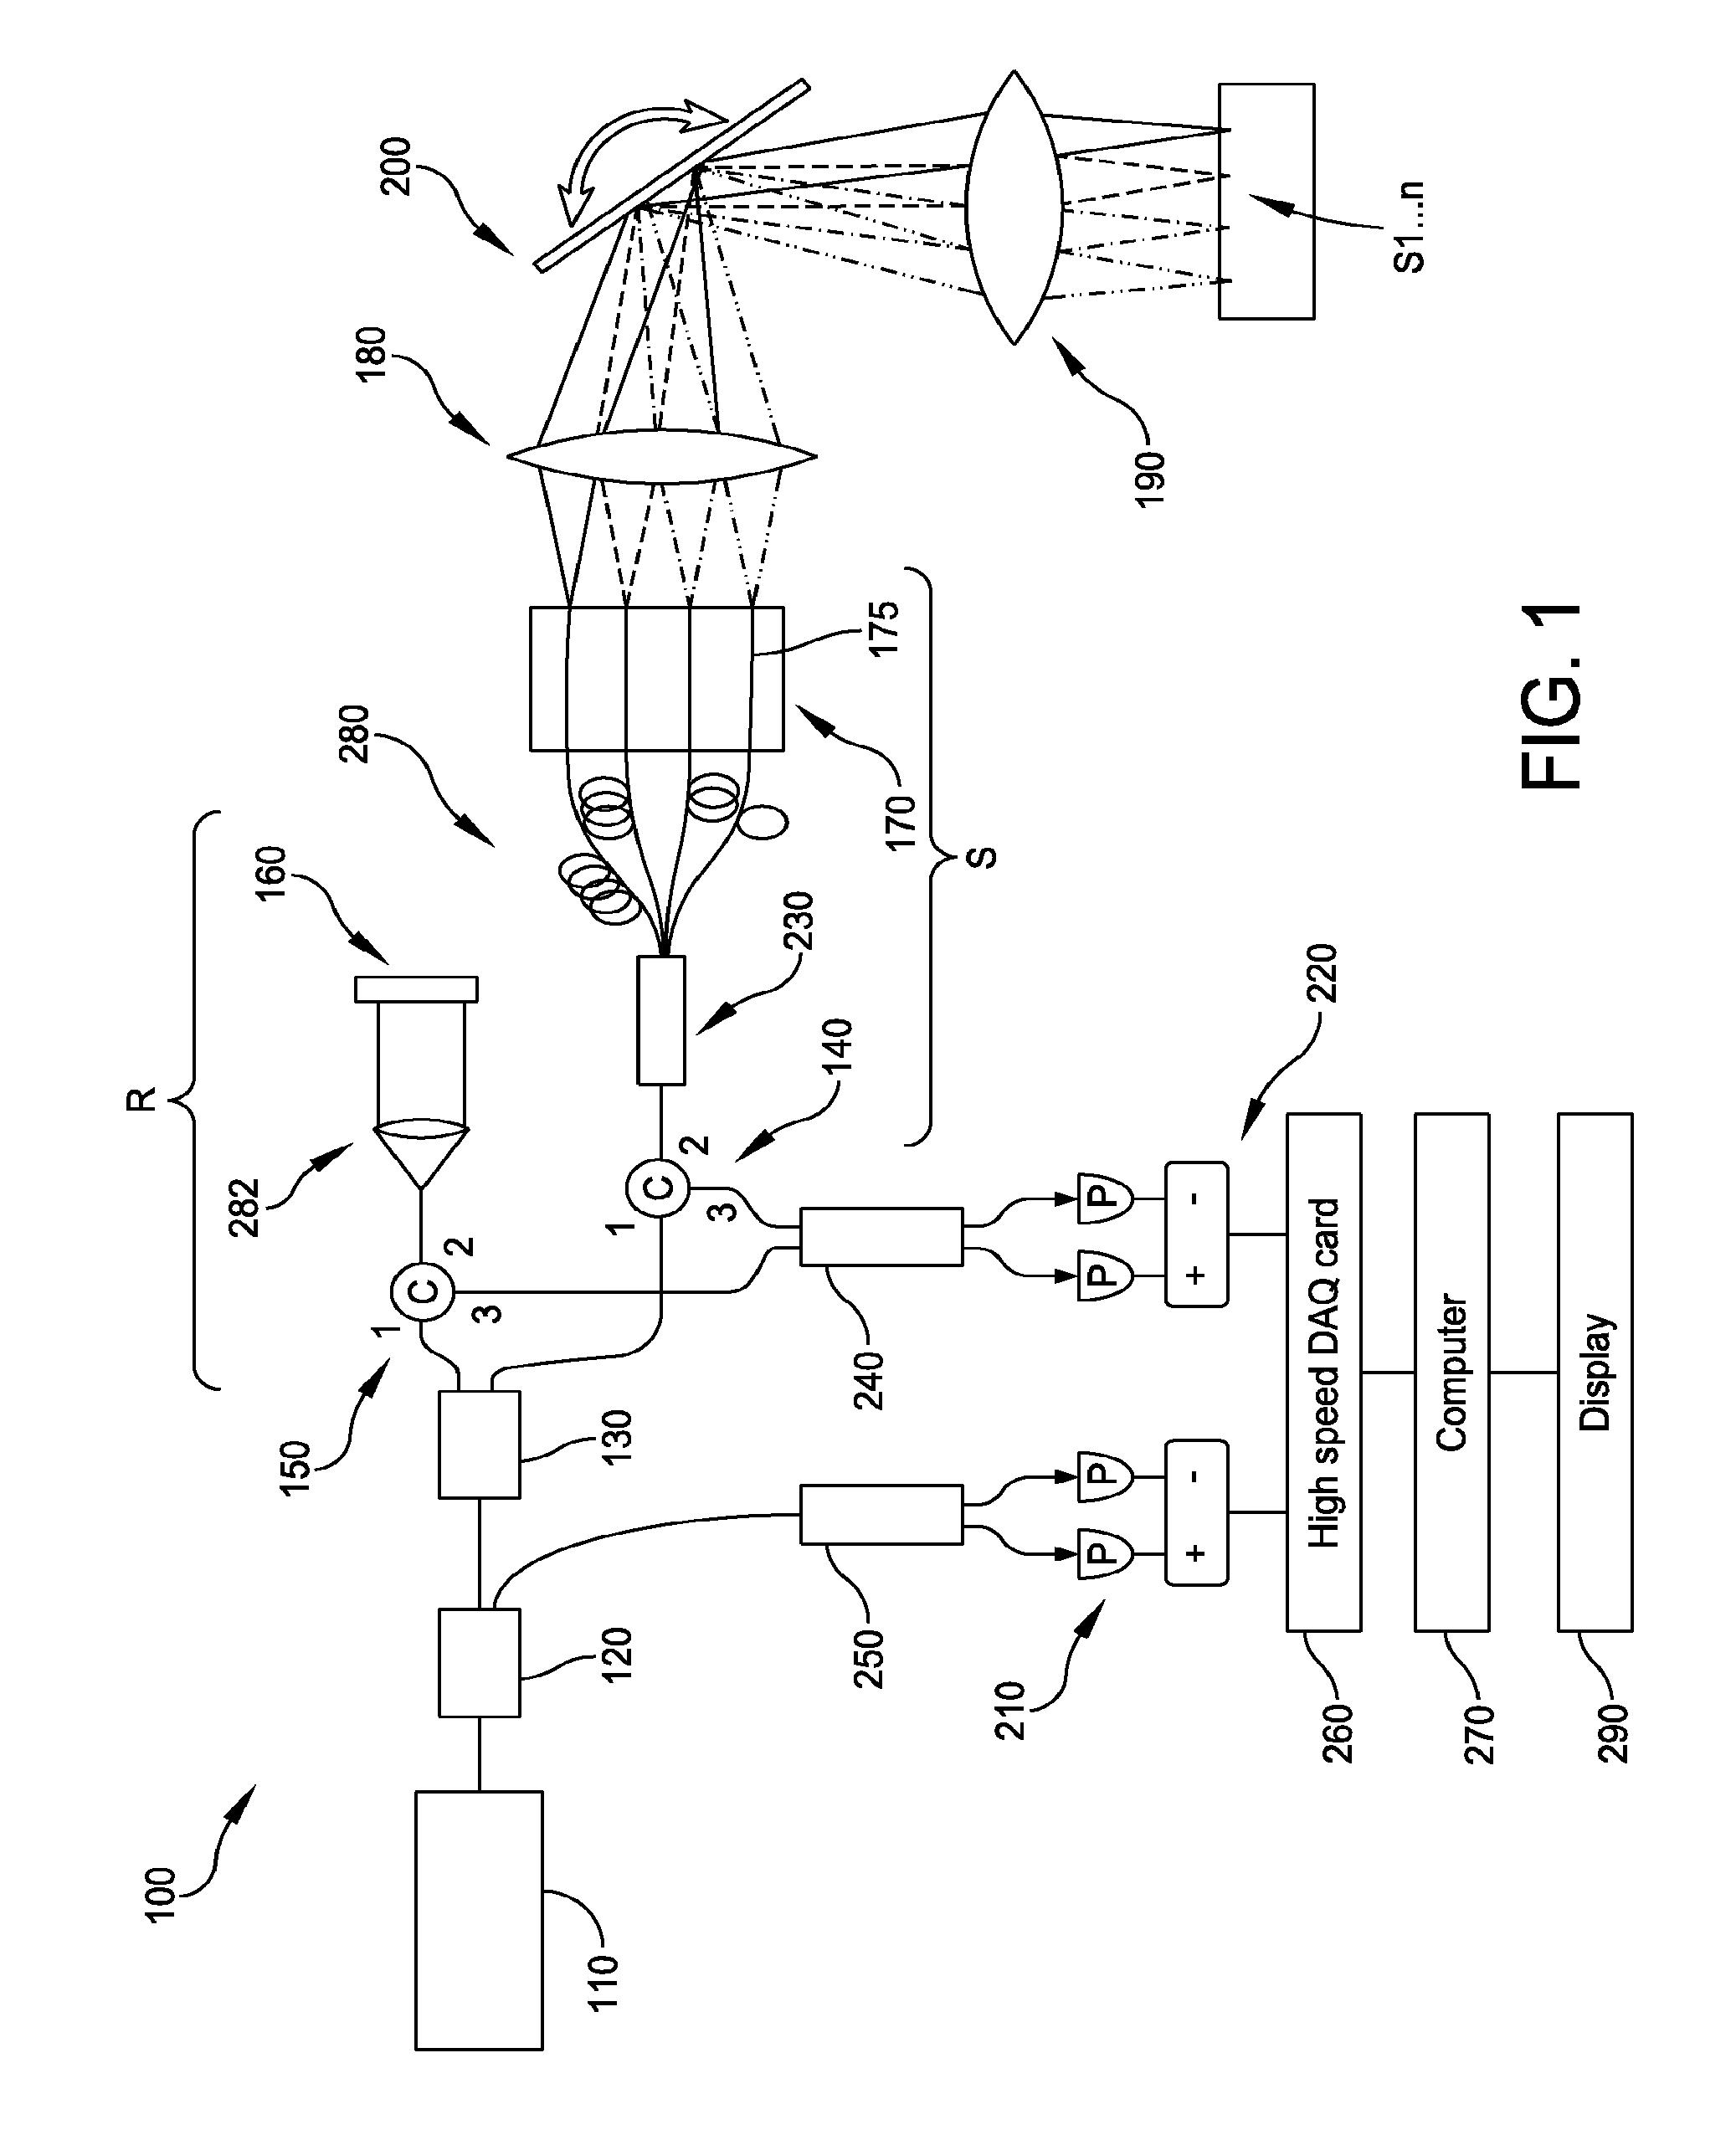 Apparatus and method for space-division multiplexing optical coherence tomography